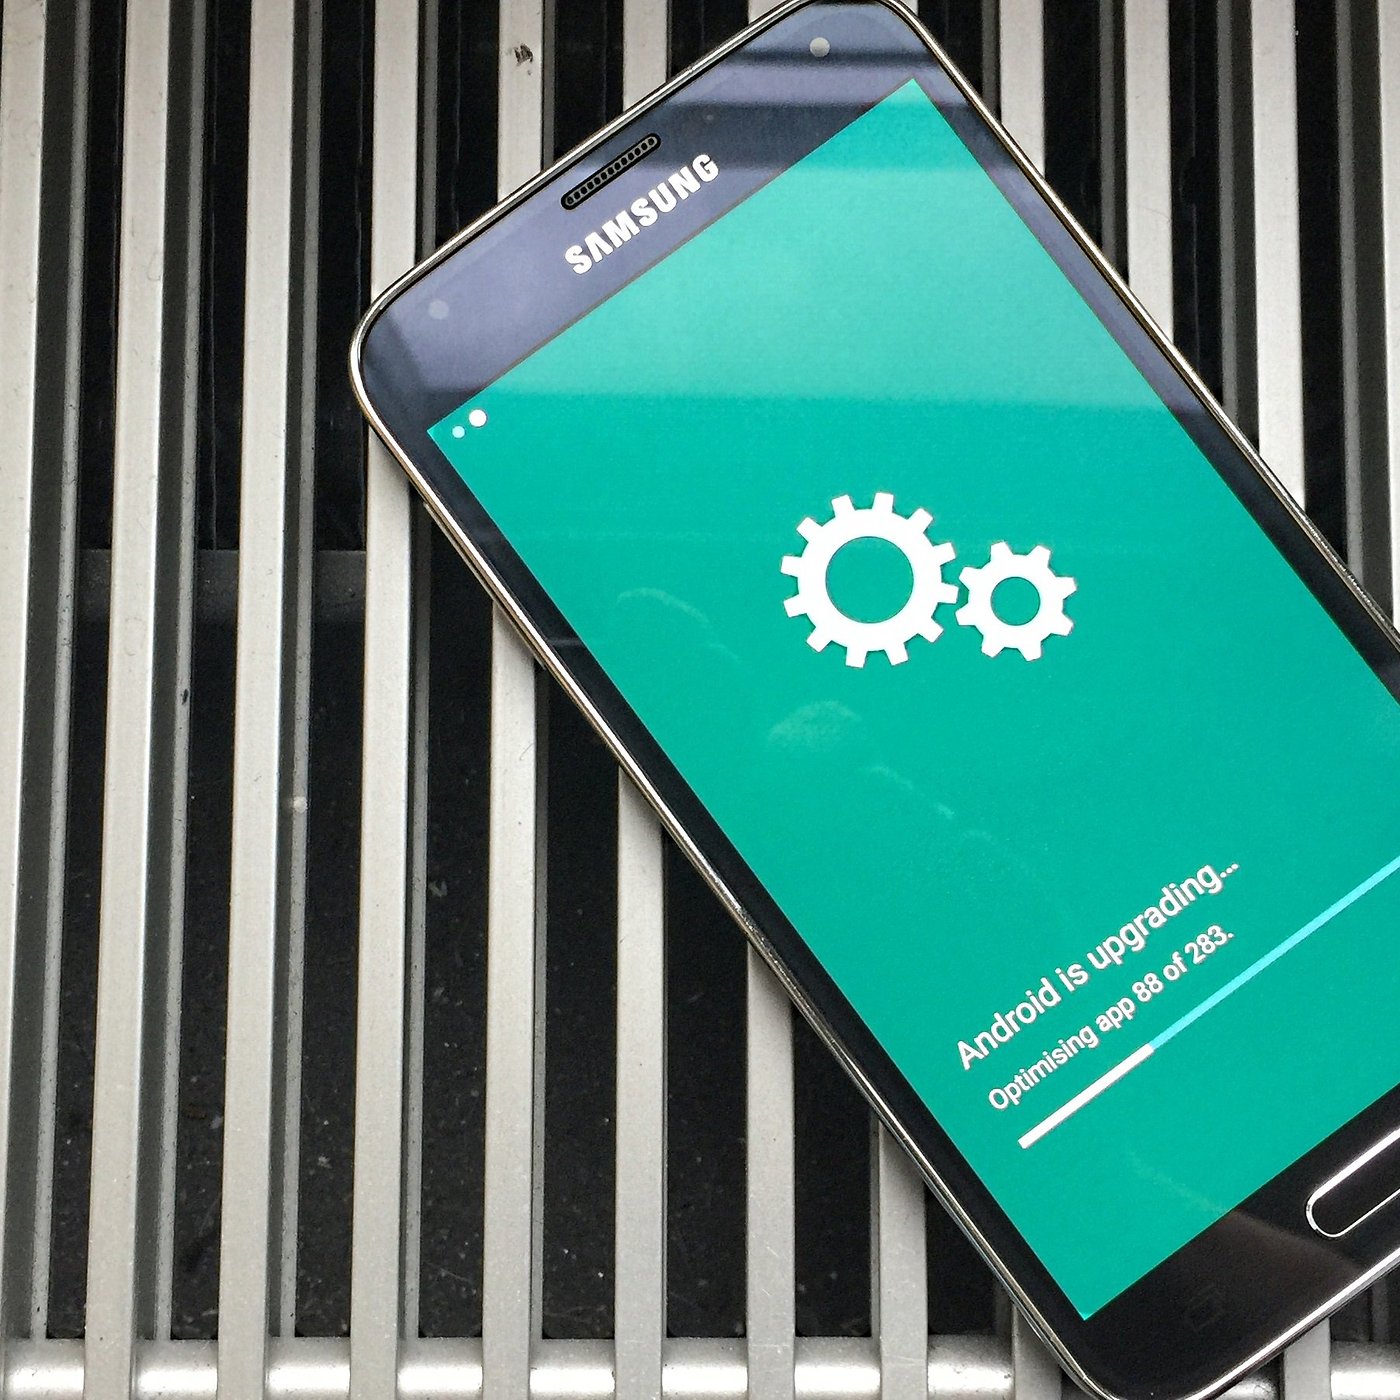 Nebu fårehyrde hydrogen How to install Android Nougat on the Samsung Galaxy S5 | NextPit